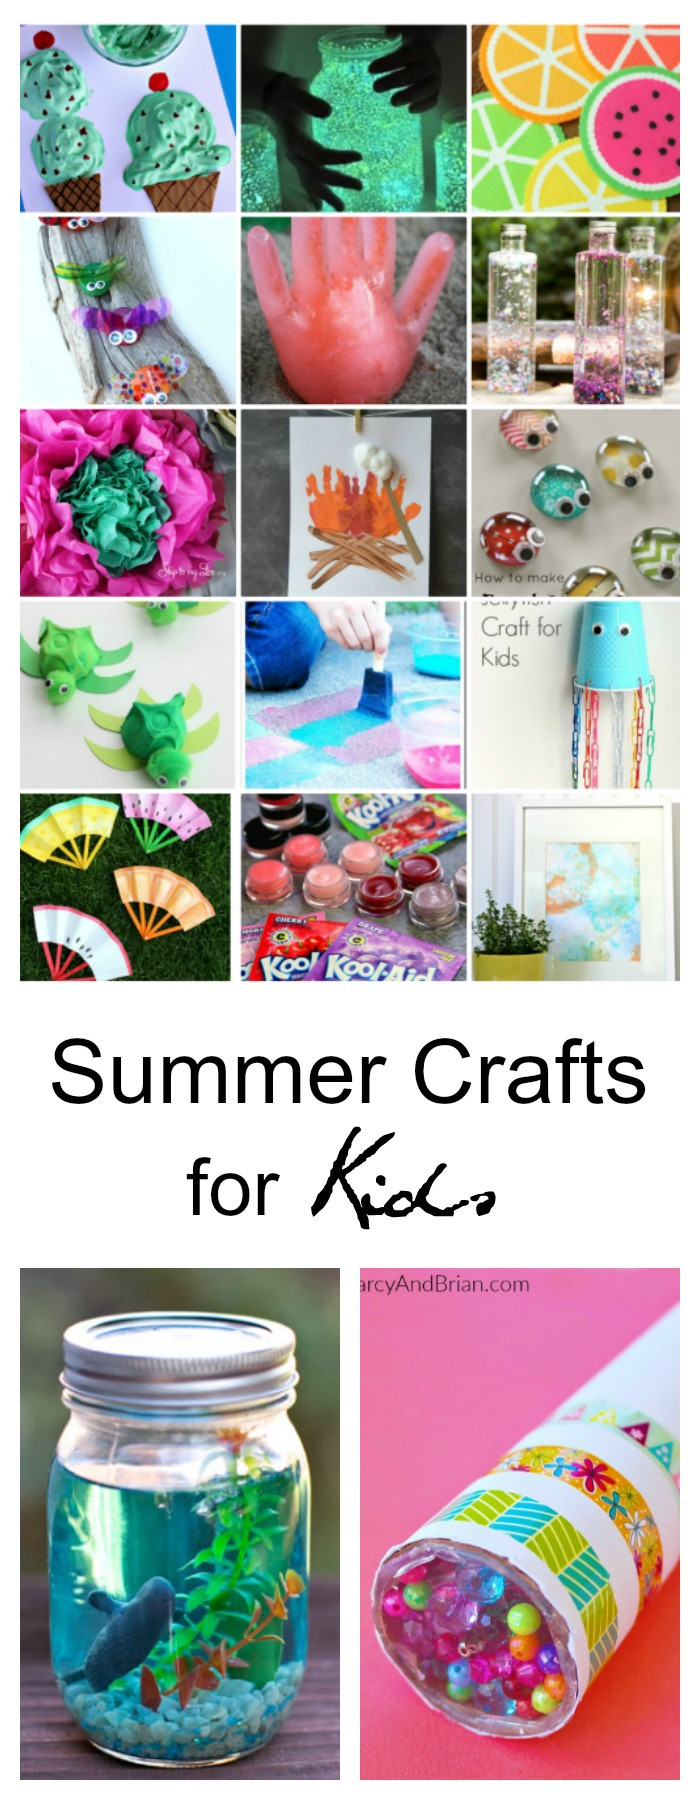 Fun Kids Crafts
 40 Creative Summer Crafts for Kids That Are Really Fun